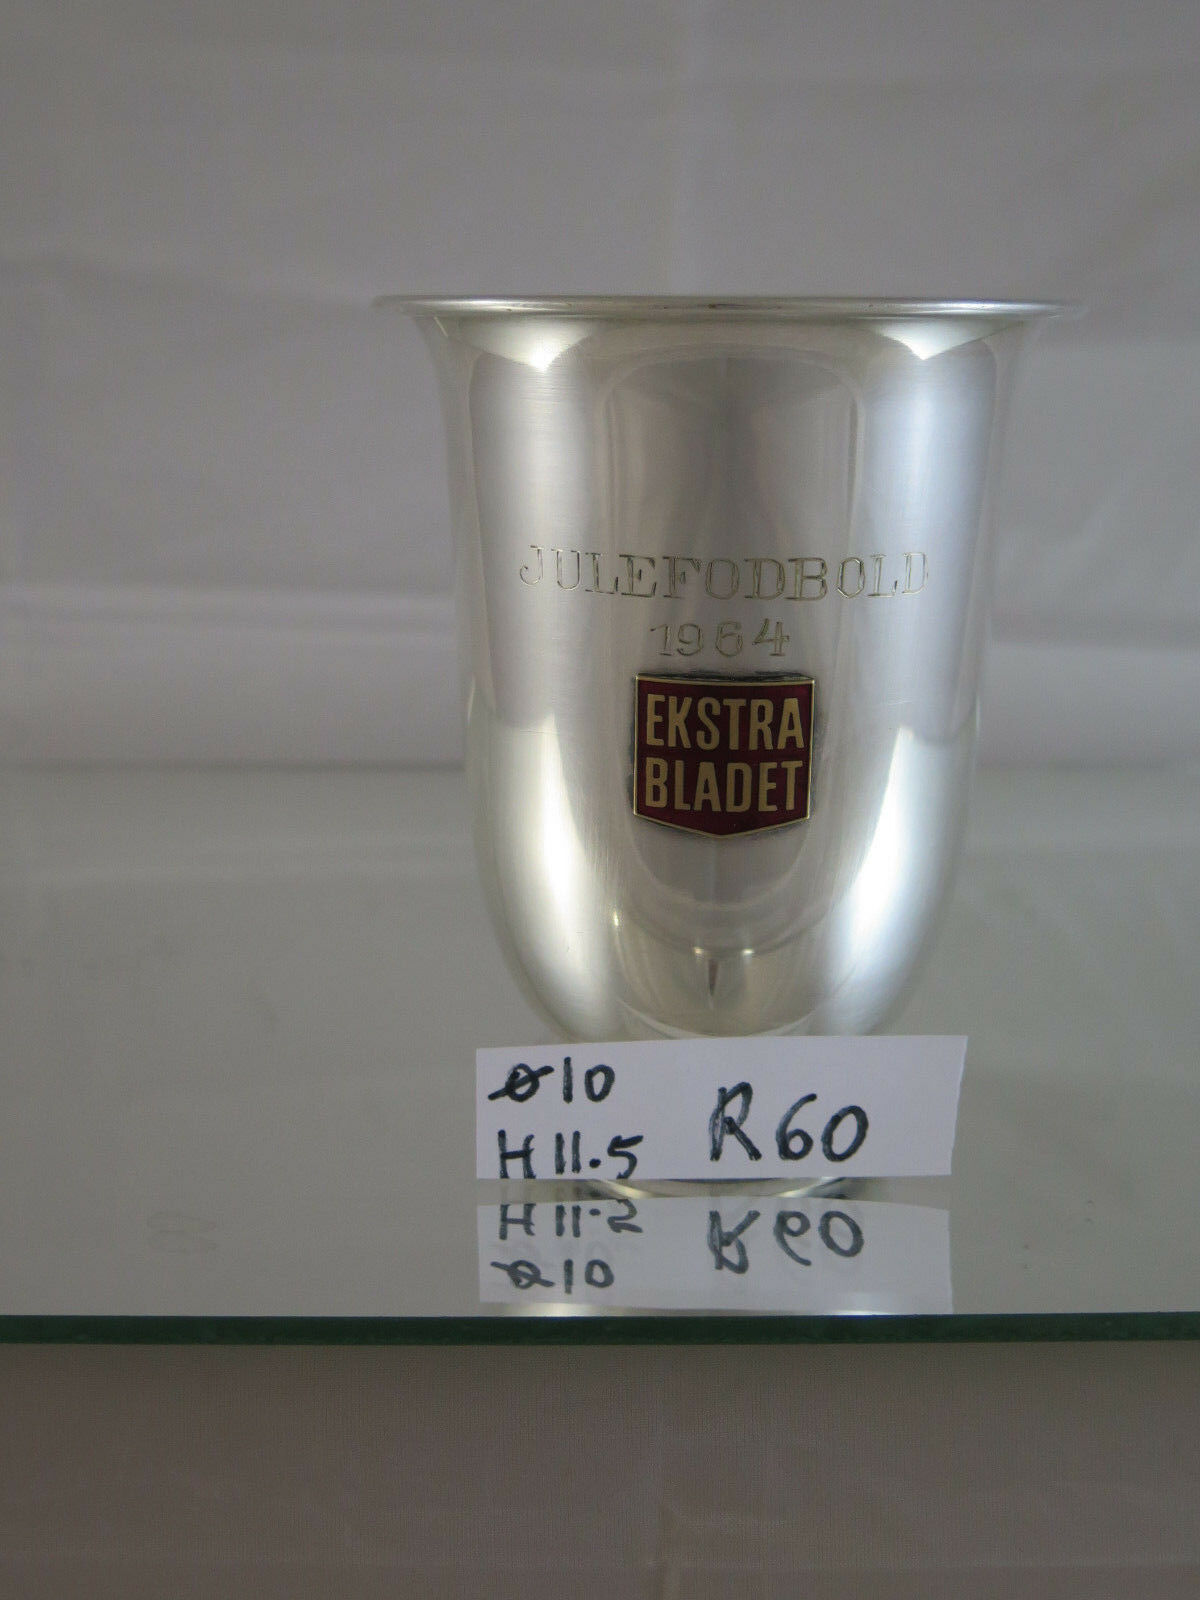 ANTIQUE SILVER-PLATED GLASS JULEFODBOLD CUP COLLECTION EKSTRA BLADET 1964 R60